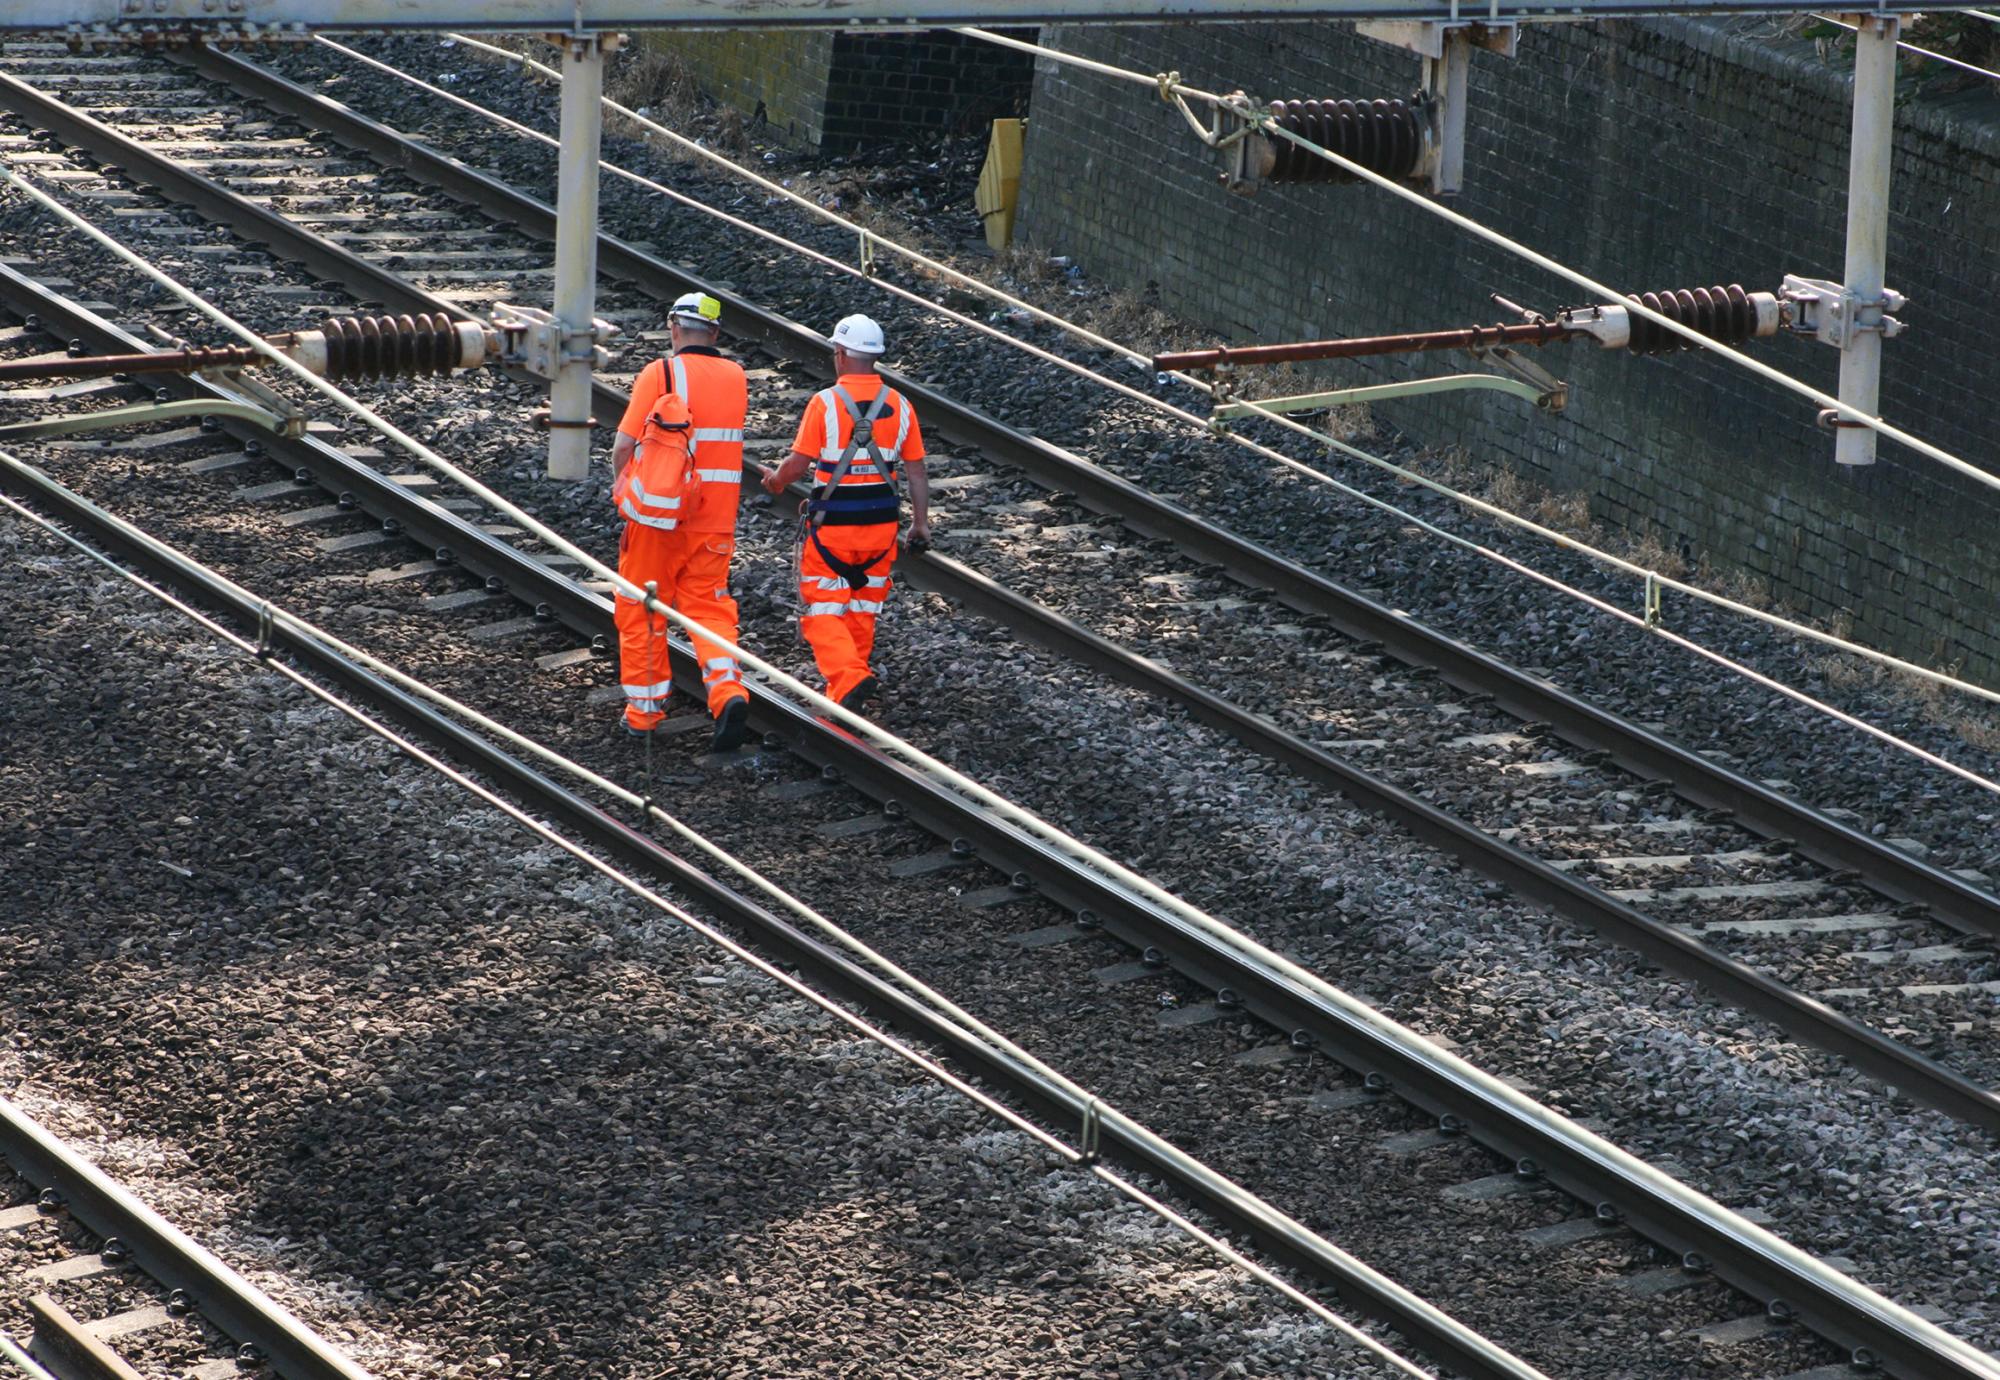 Two rail workers on the track